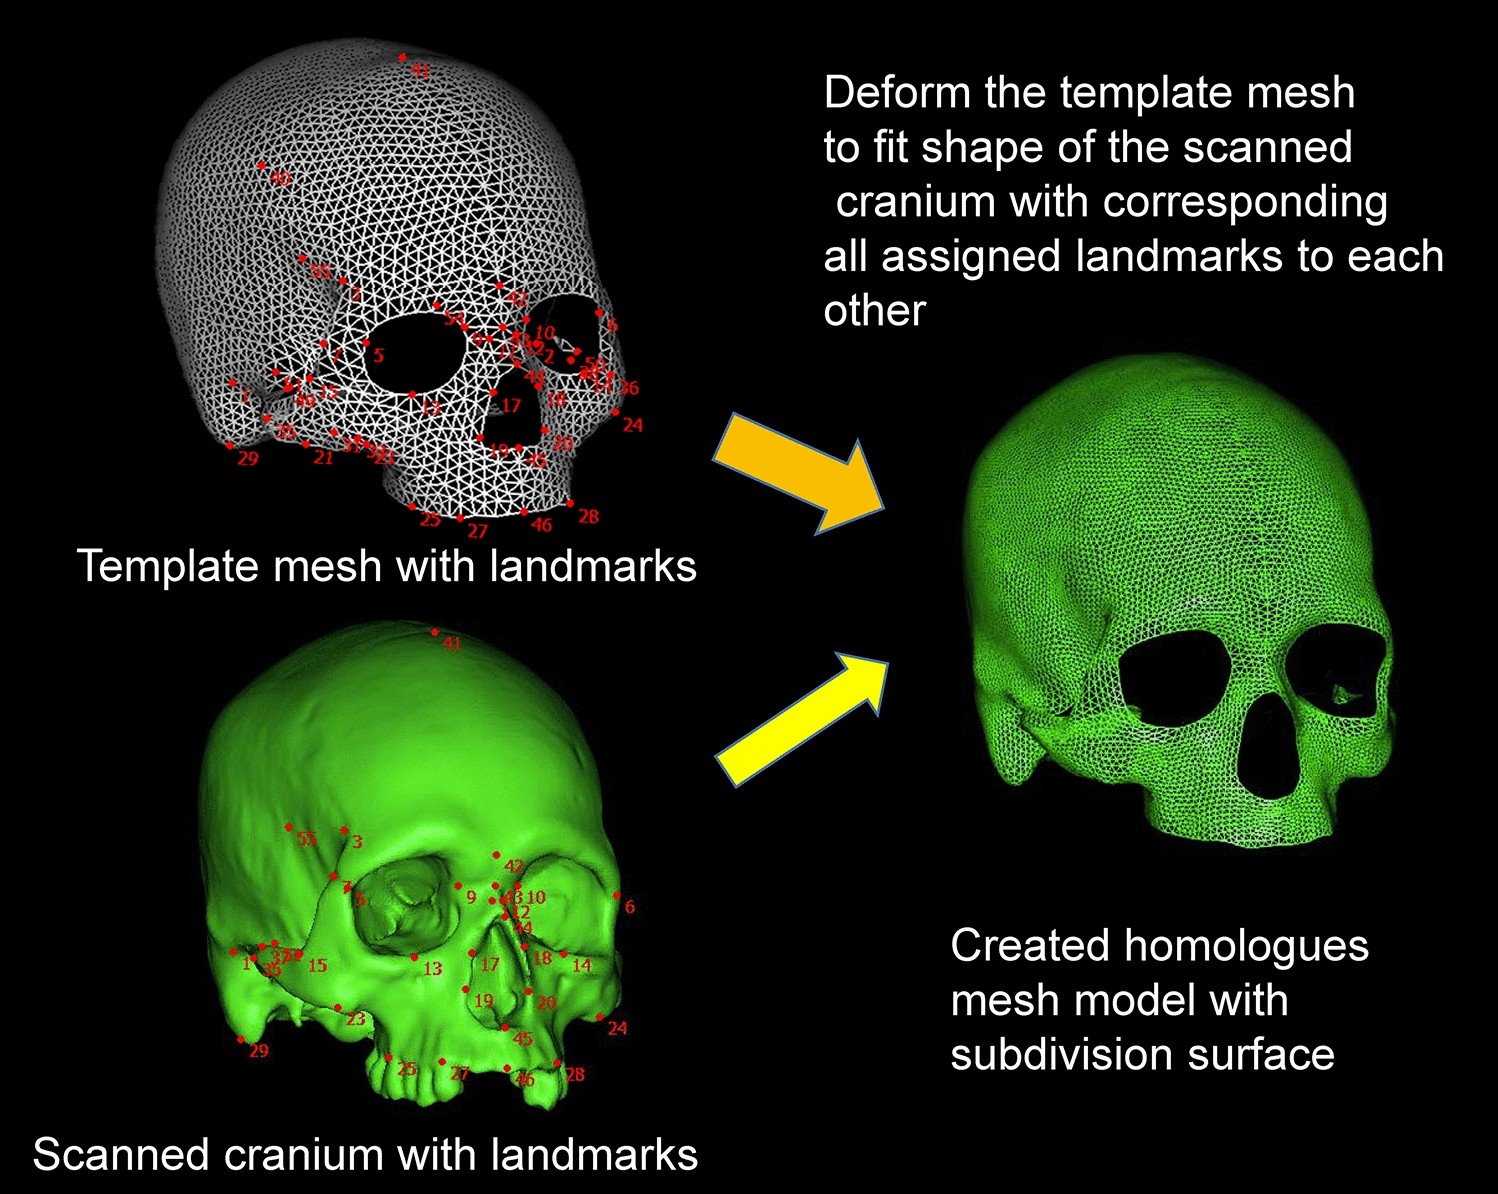 Global patterns of the cranial form of modern human populations described by analysis of a 3D surface homologous model Scientific Reports picture image